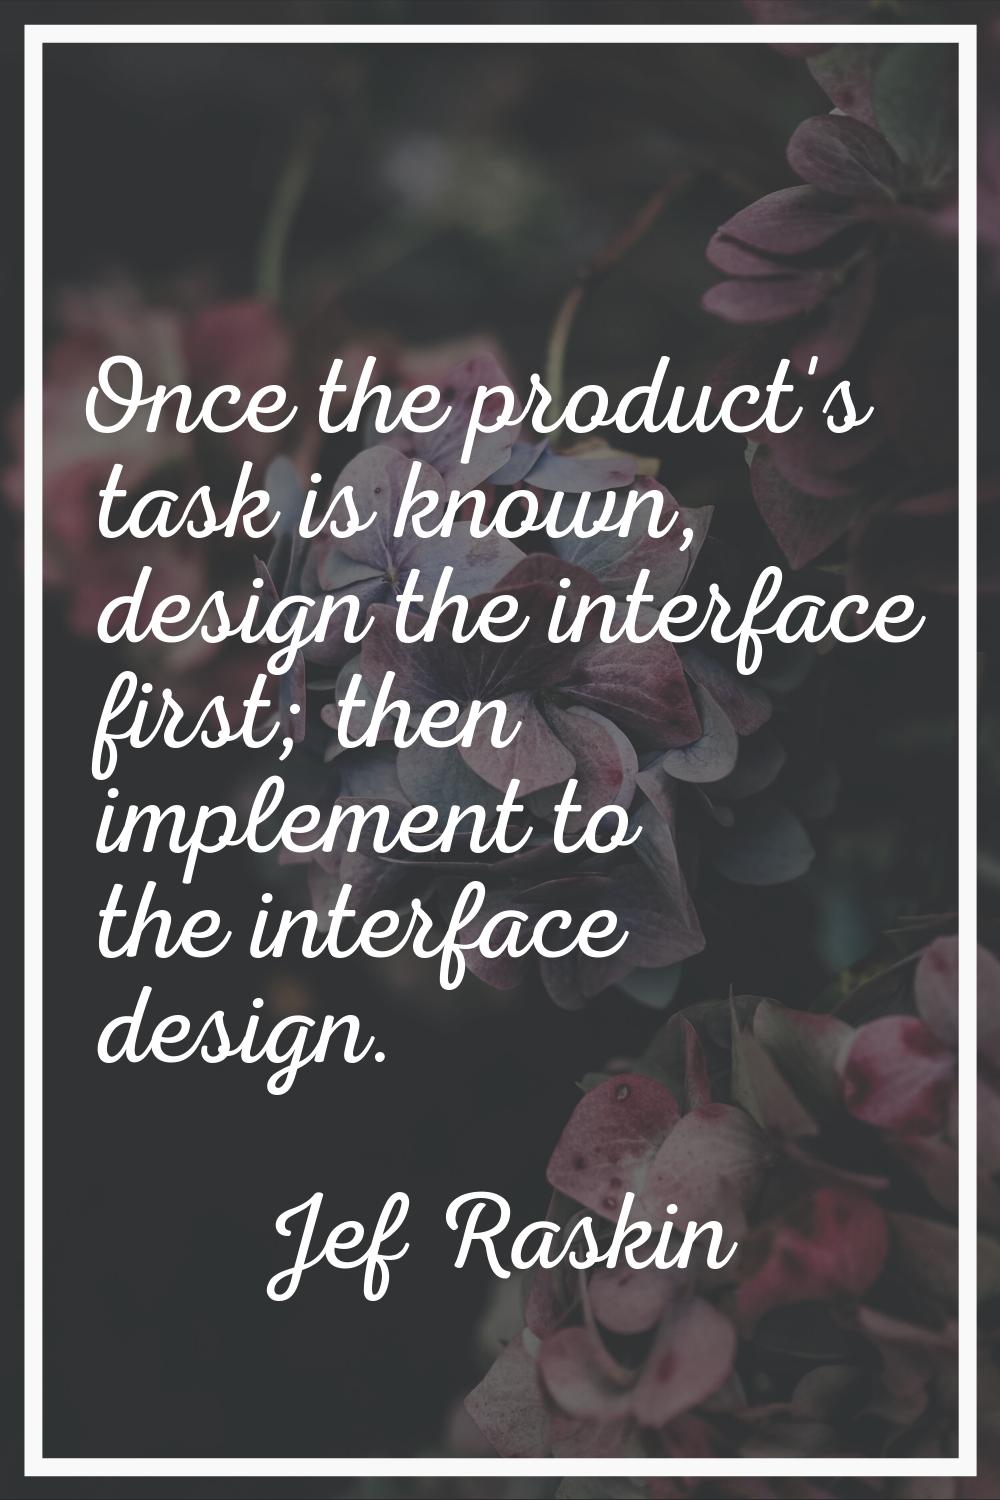 Once the product's task is known, design the interface first; then implement to the interface desig